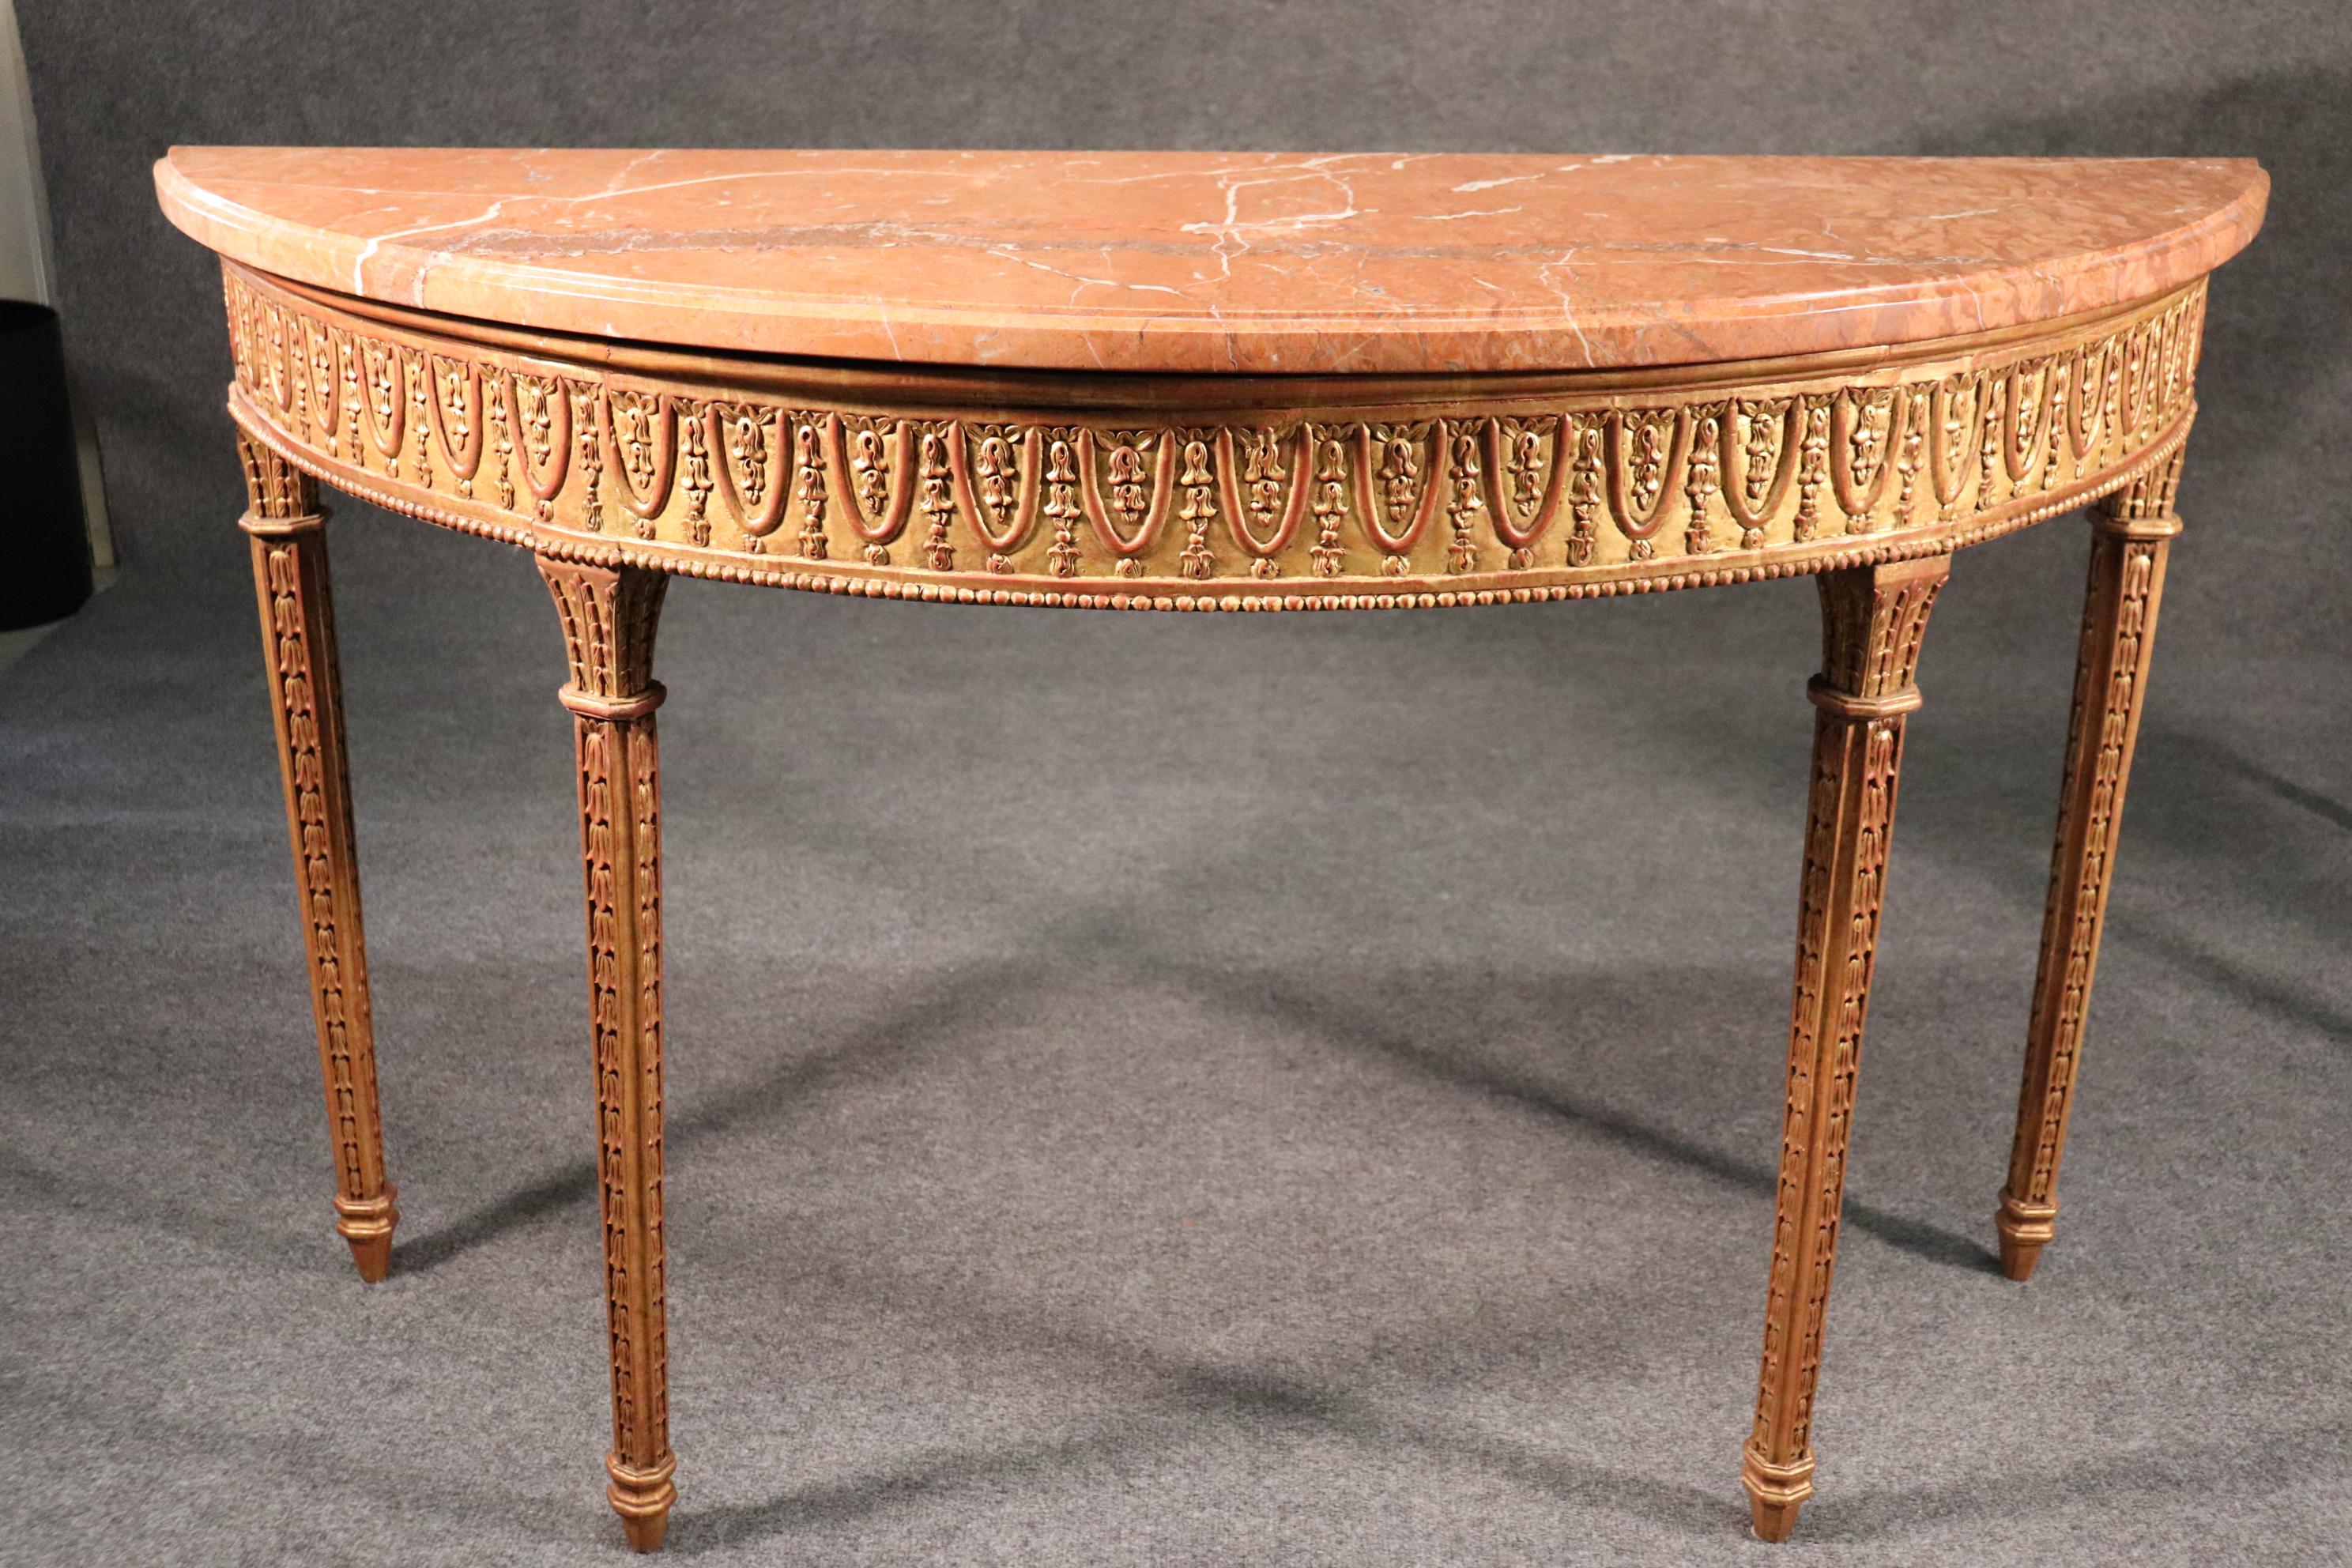 This is a fantastic pair of gilded and superbly carved marble-top console tables. The tables have wonderful marble tops and gorgeous gold leaf giltwood frames. They each measure 56 wide x 34 tall x 21 deep.